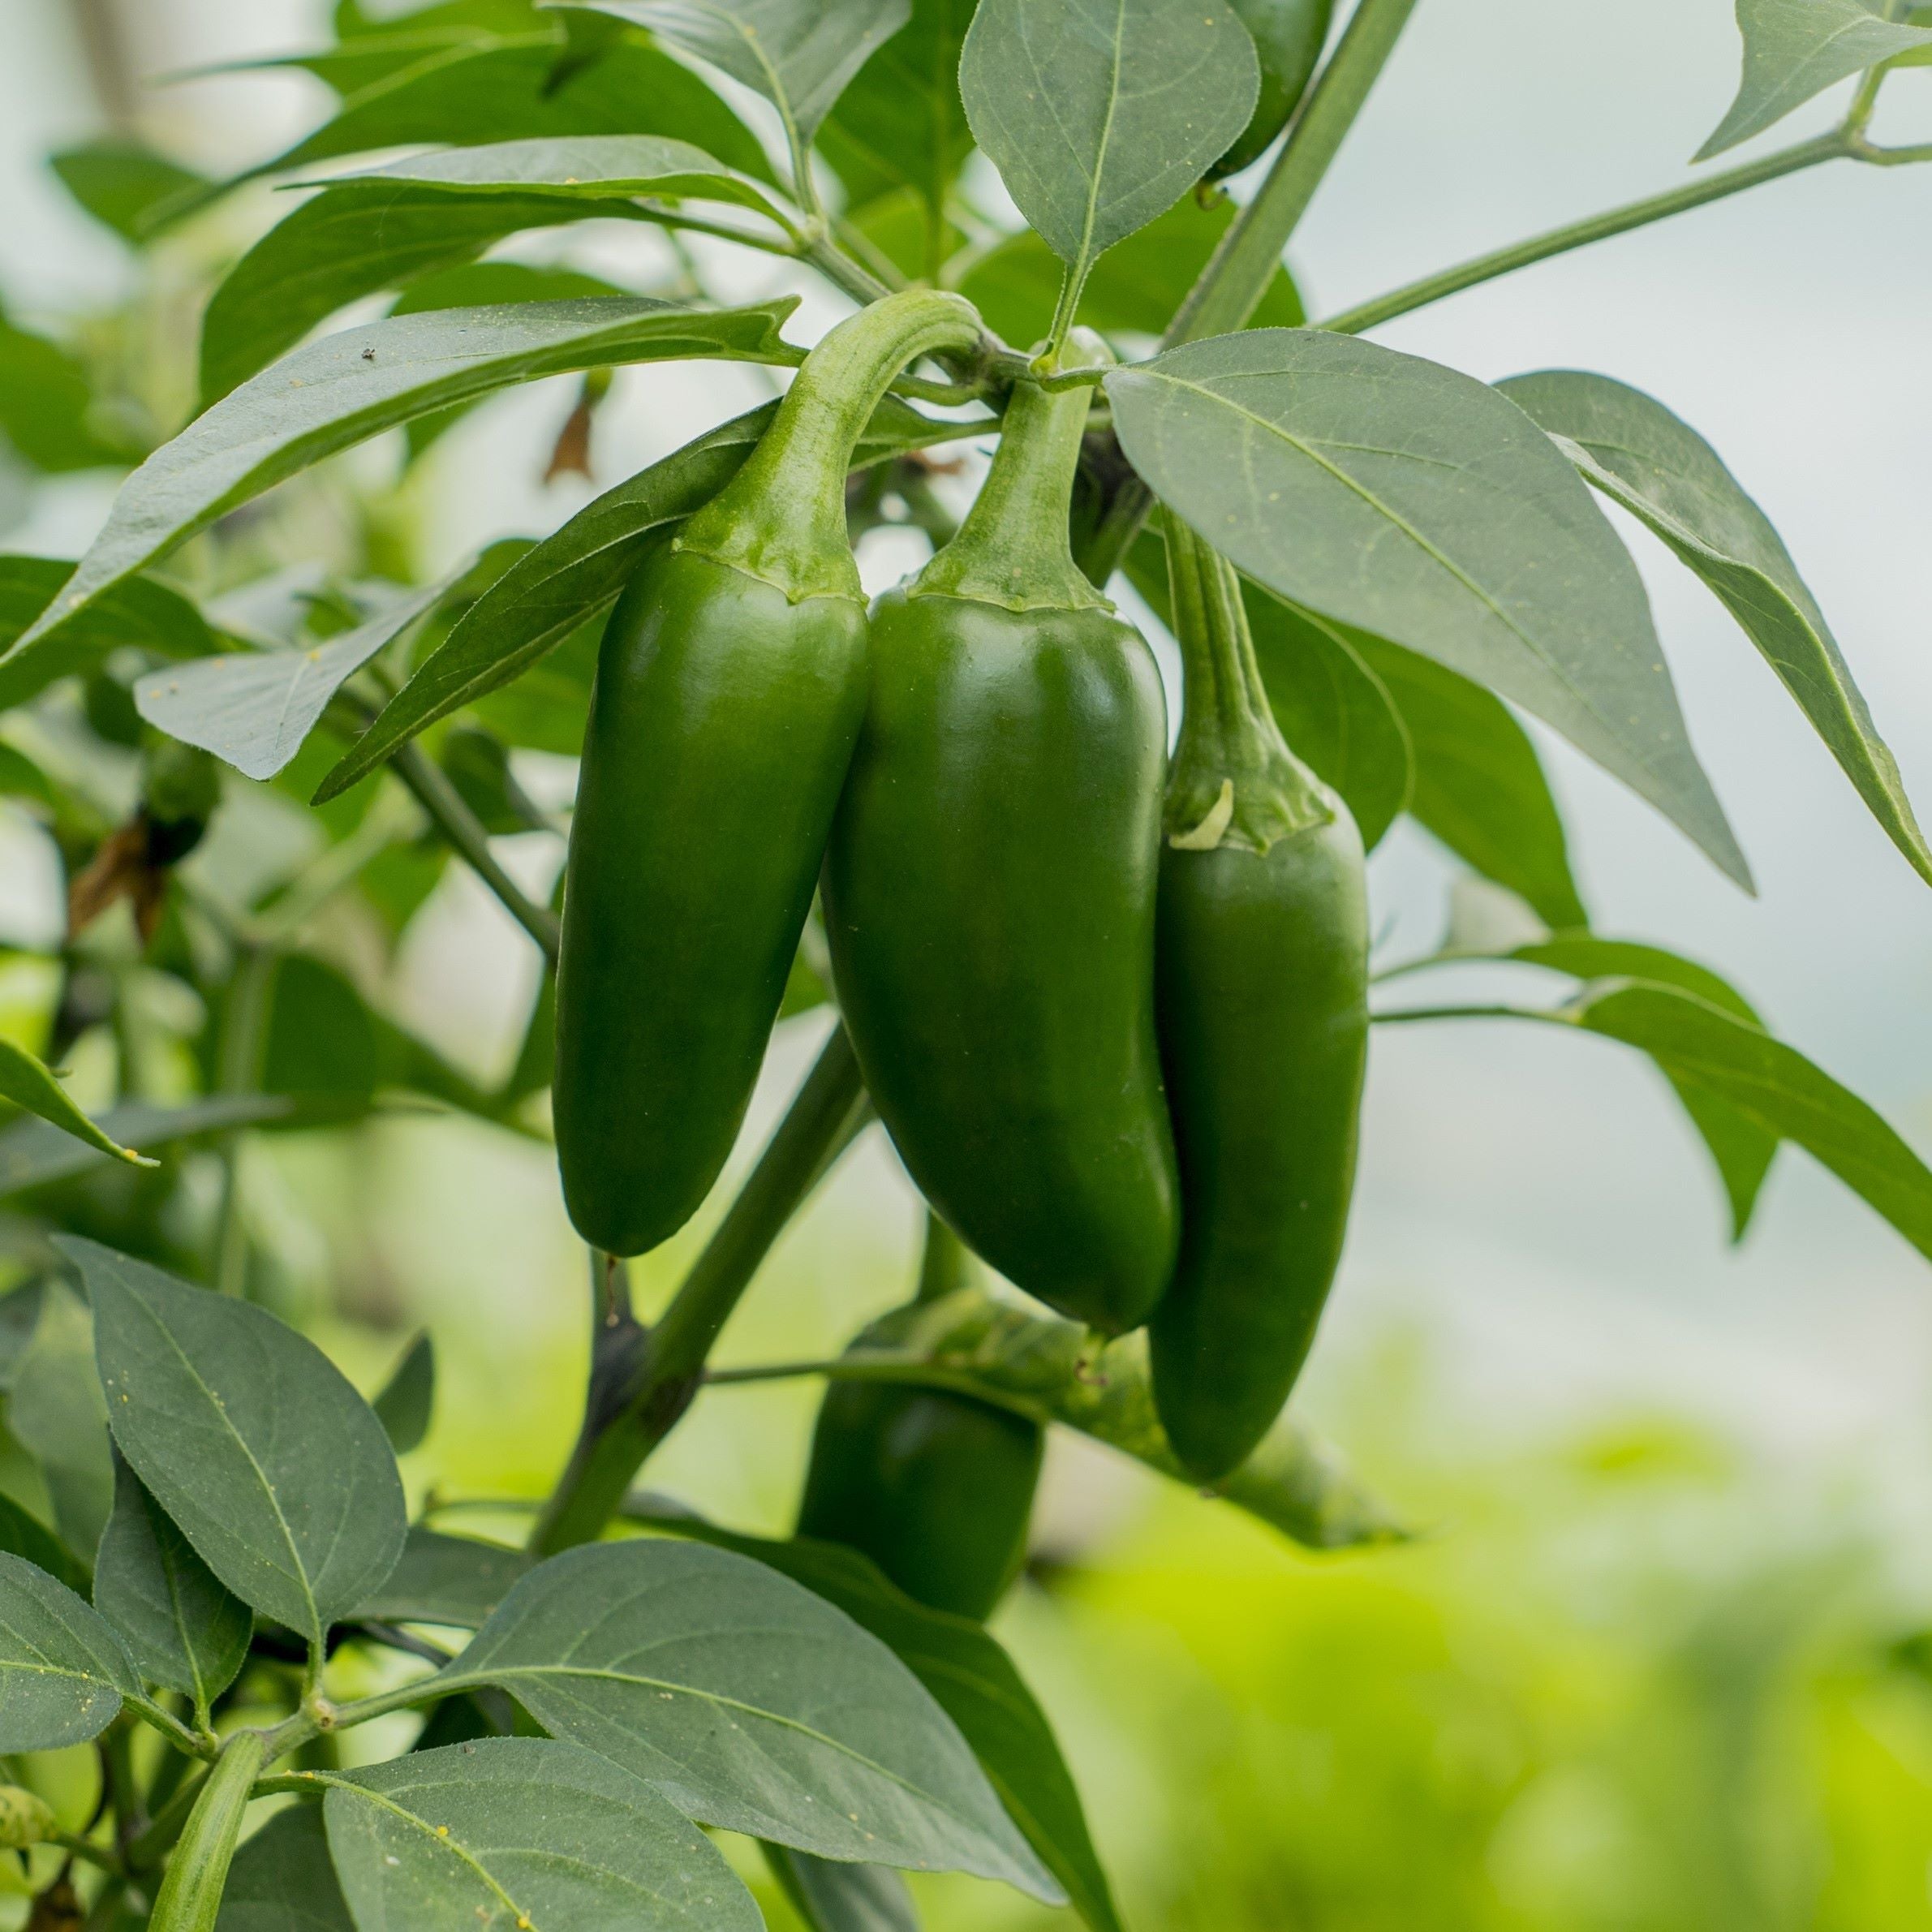 Jalapeno Pepper Plants for – To Bulbs